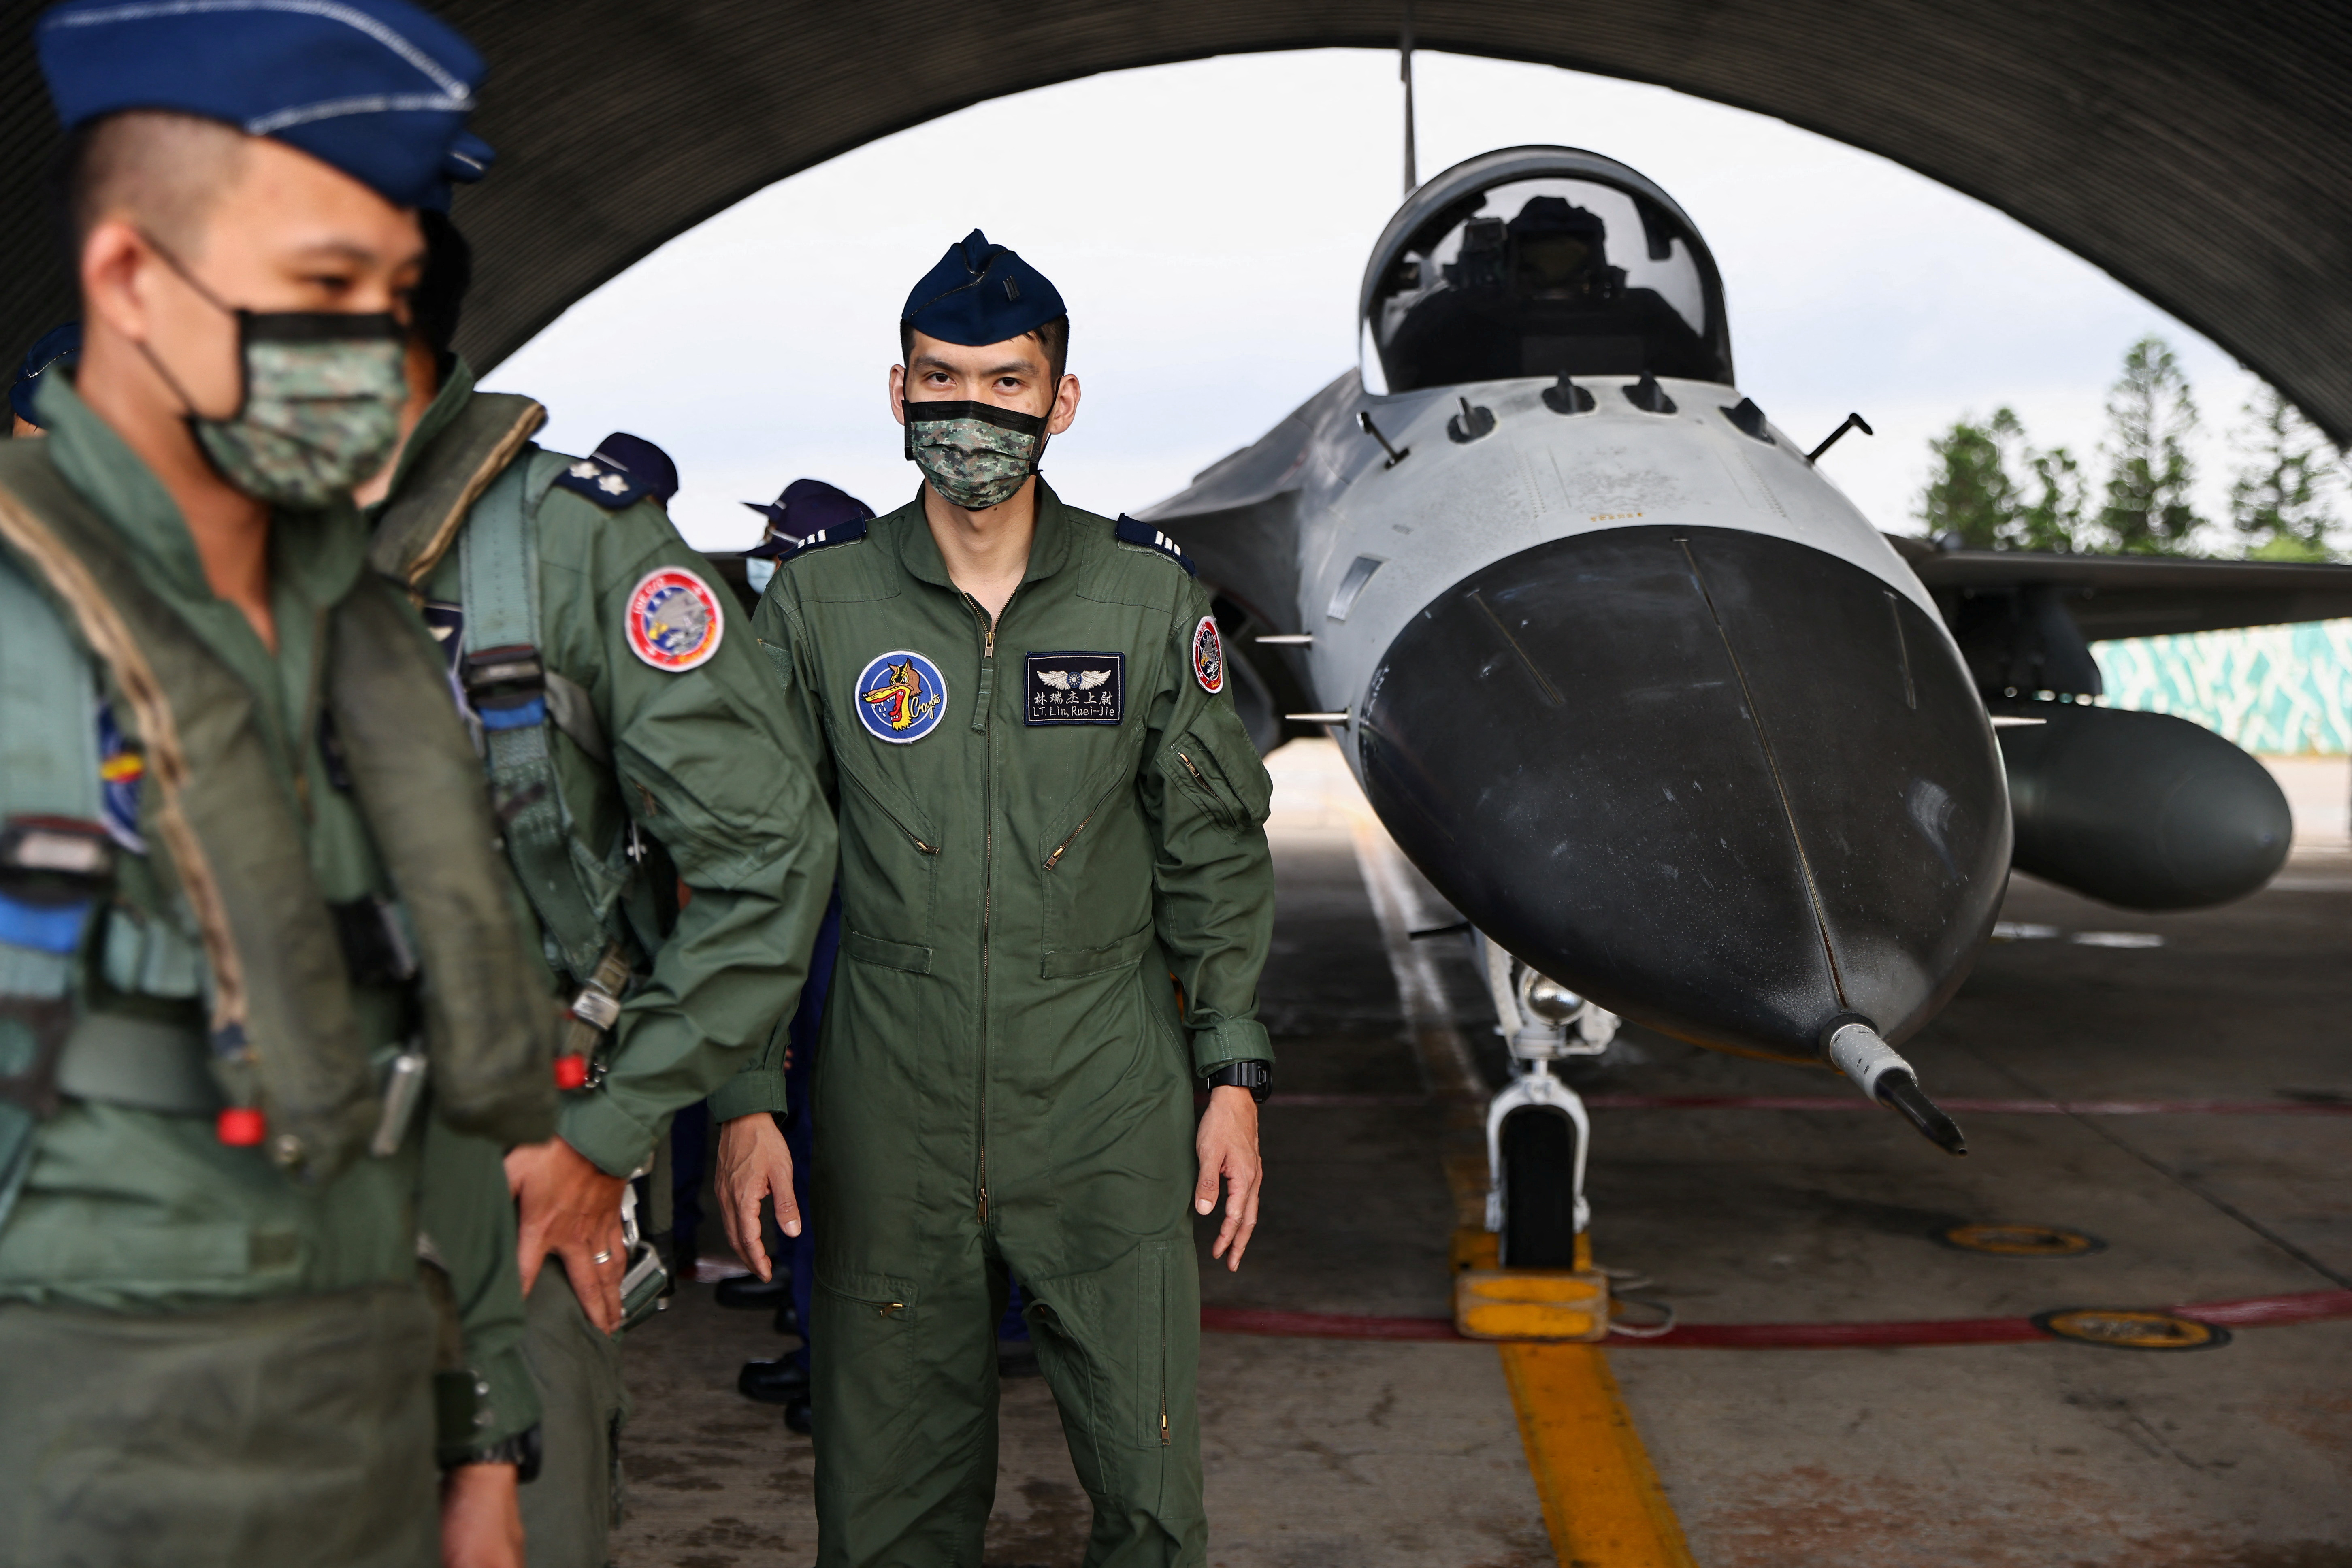 Pilots leave after an event at an Air Force base in Penghu Islands